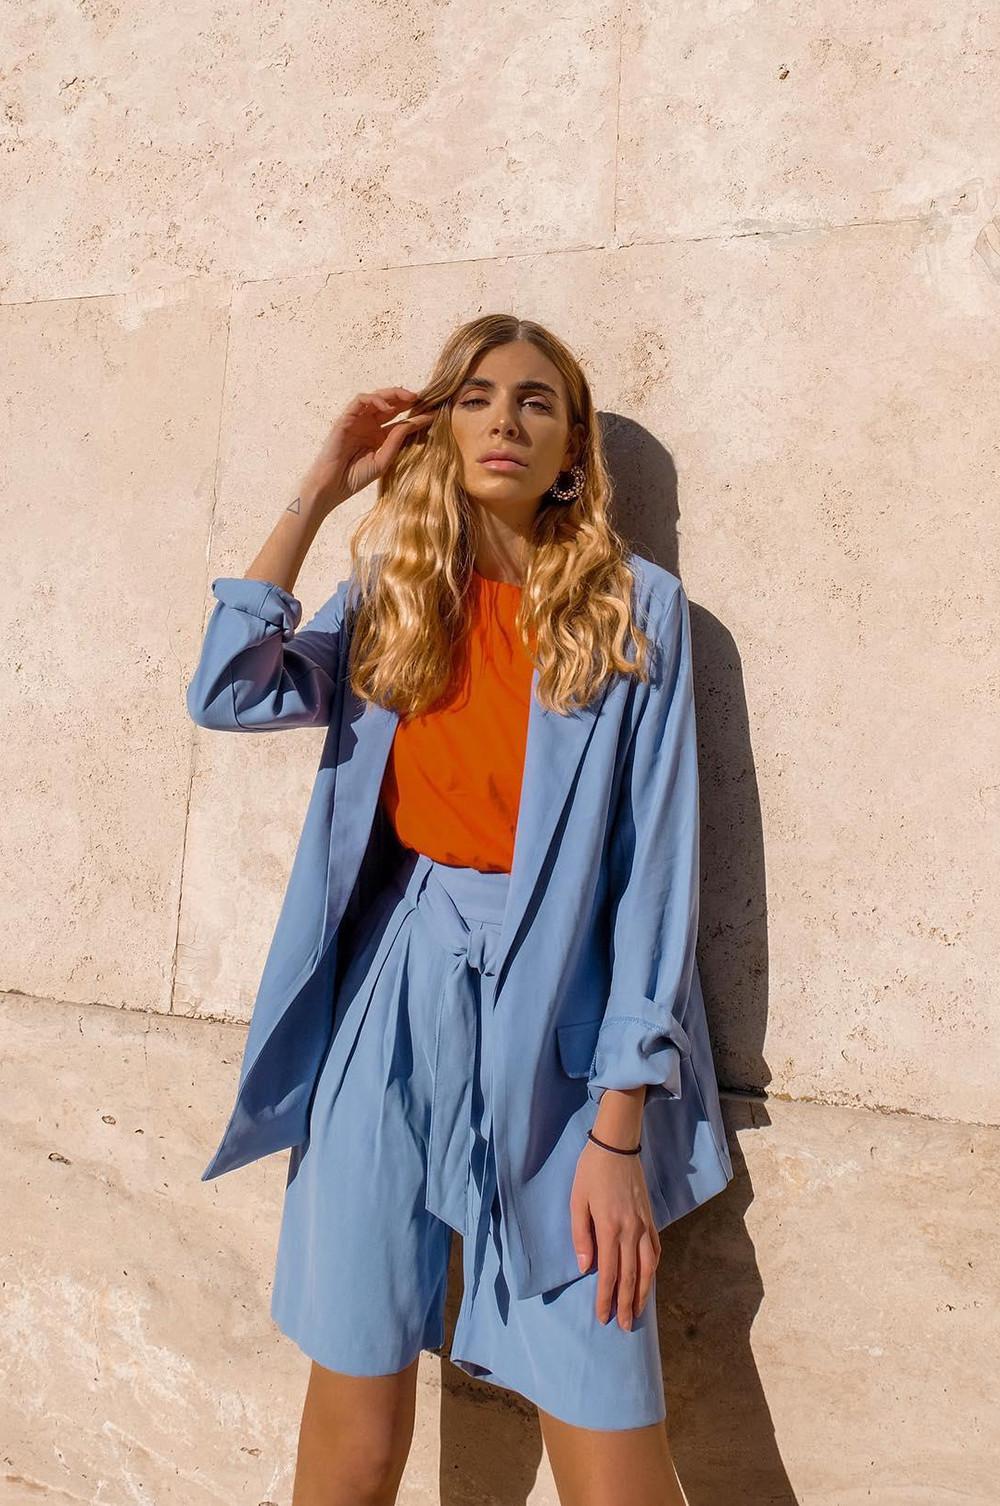 Pastel Tailoring and Co Ords Trend | Primark